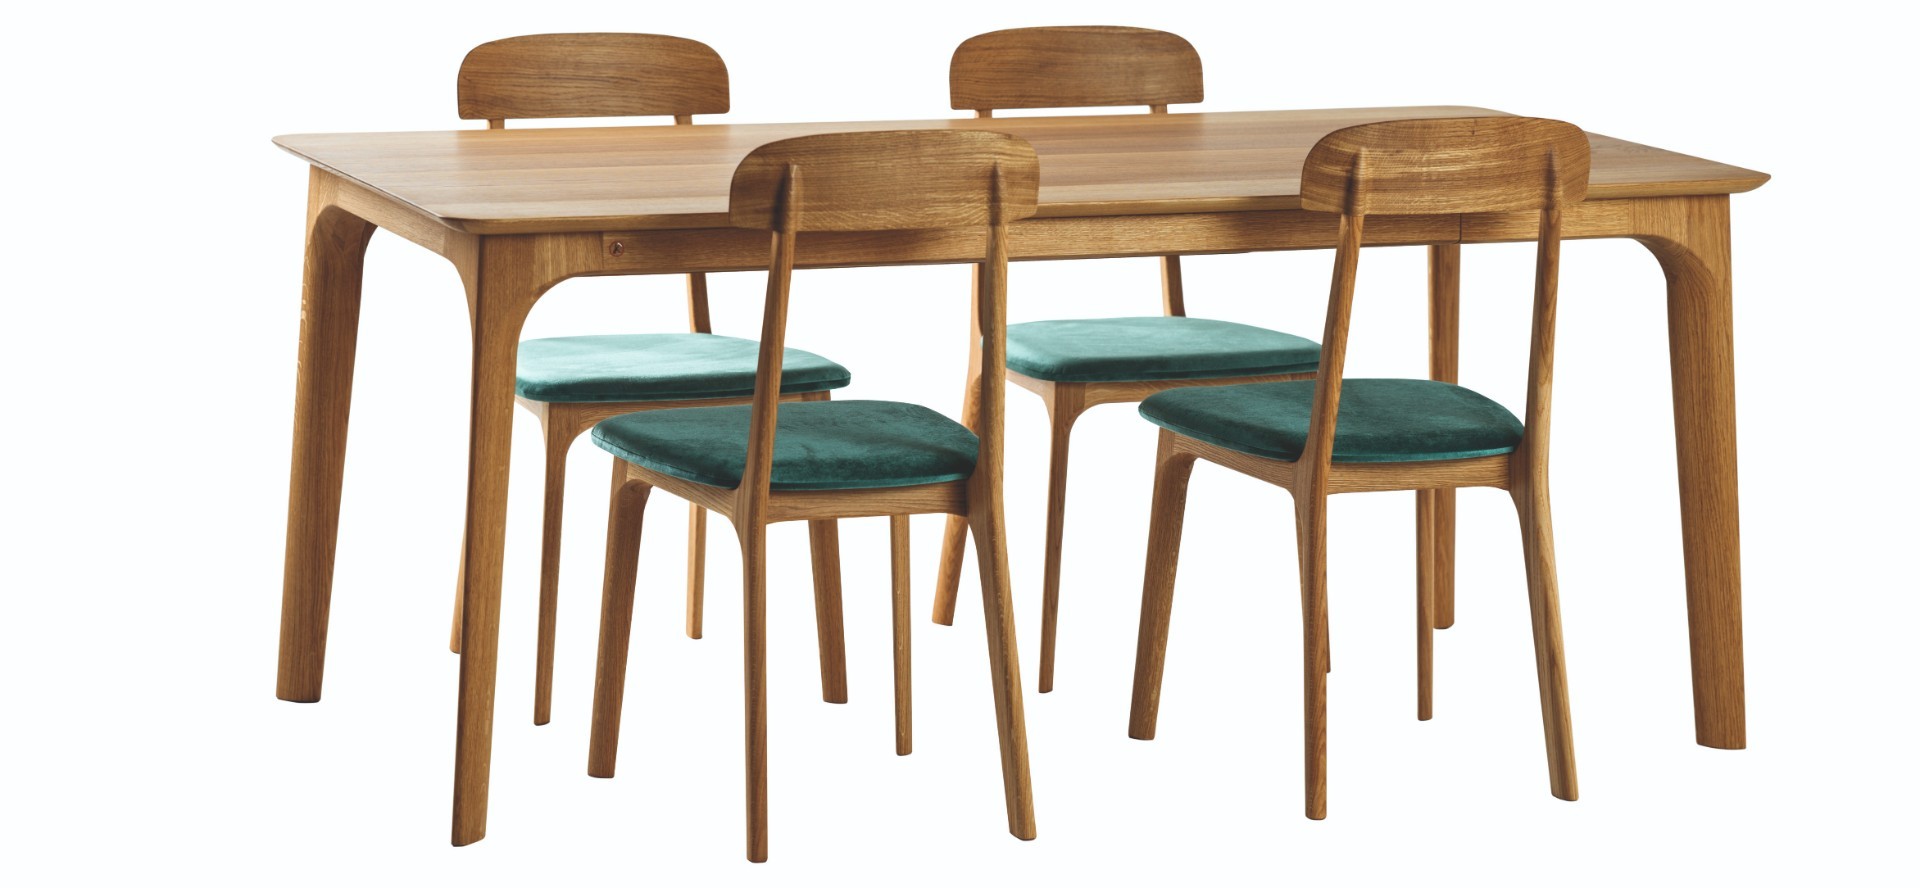 Discover Elica! Our new extendable table and chairs